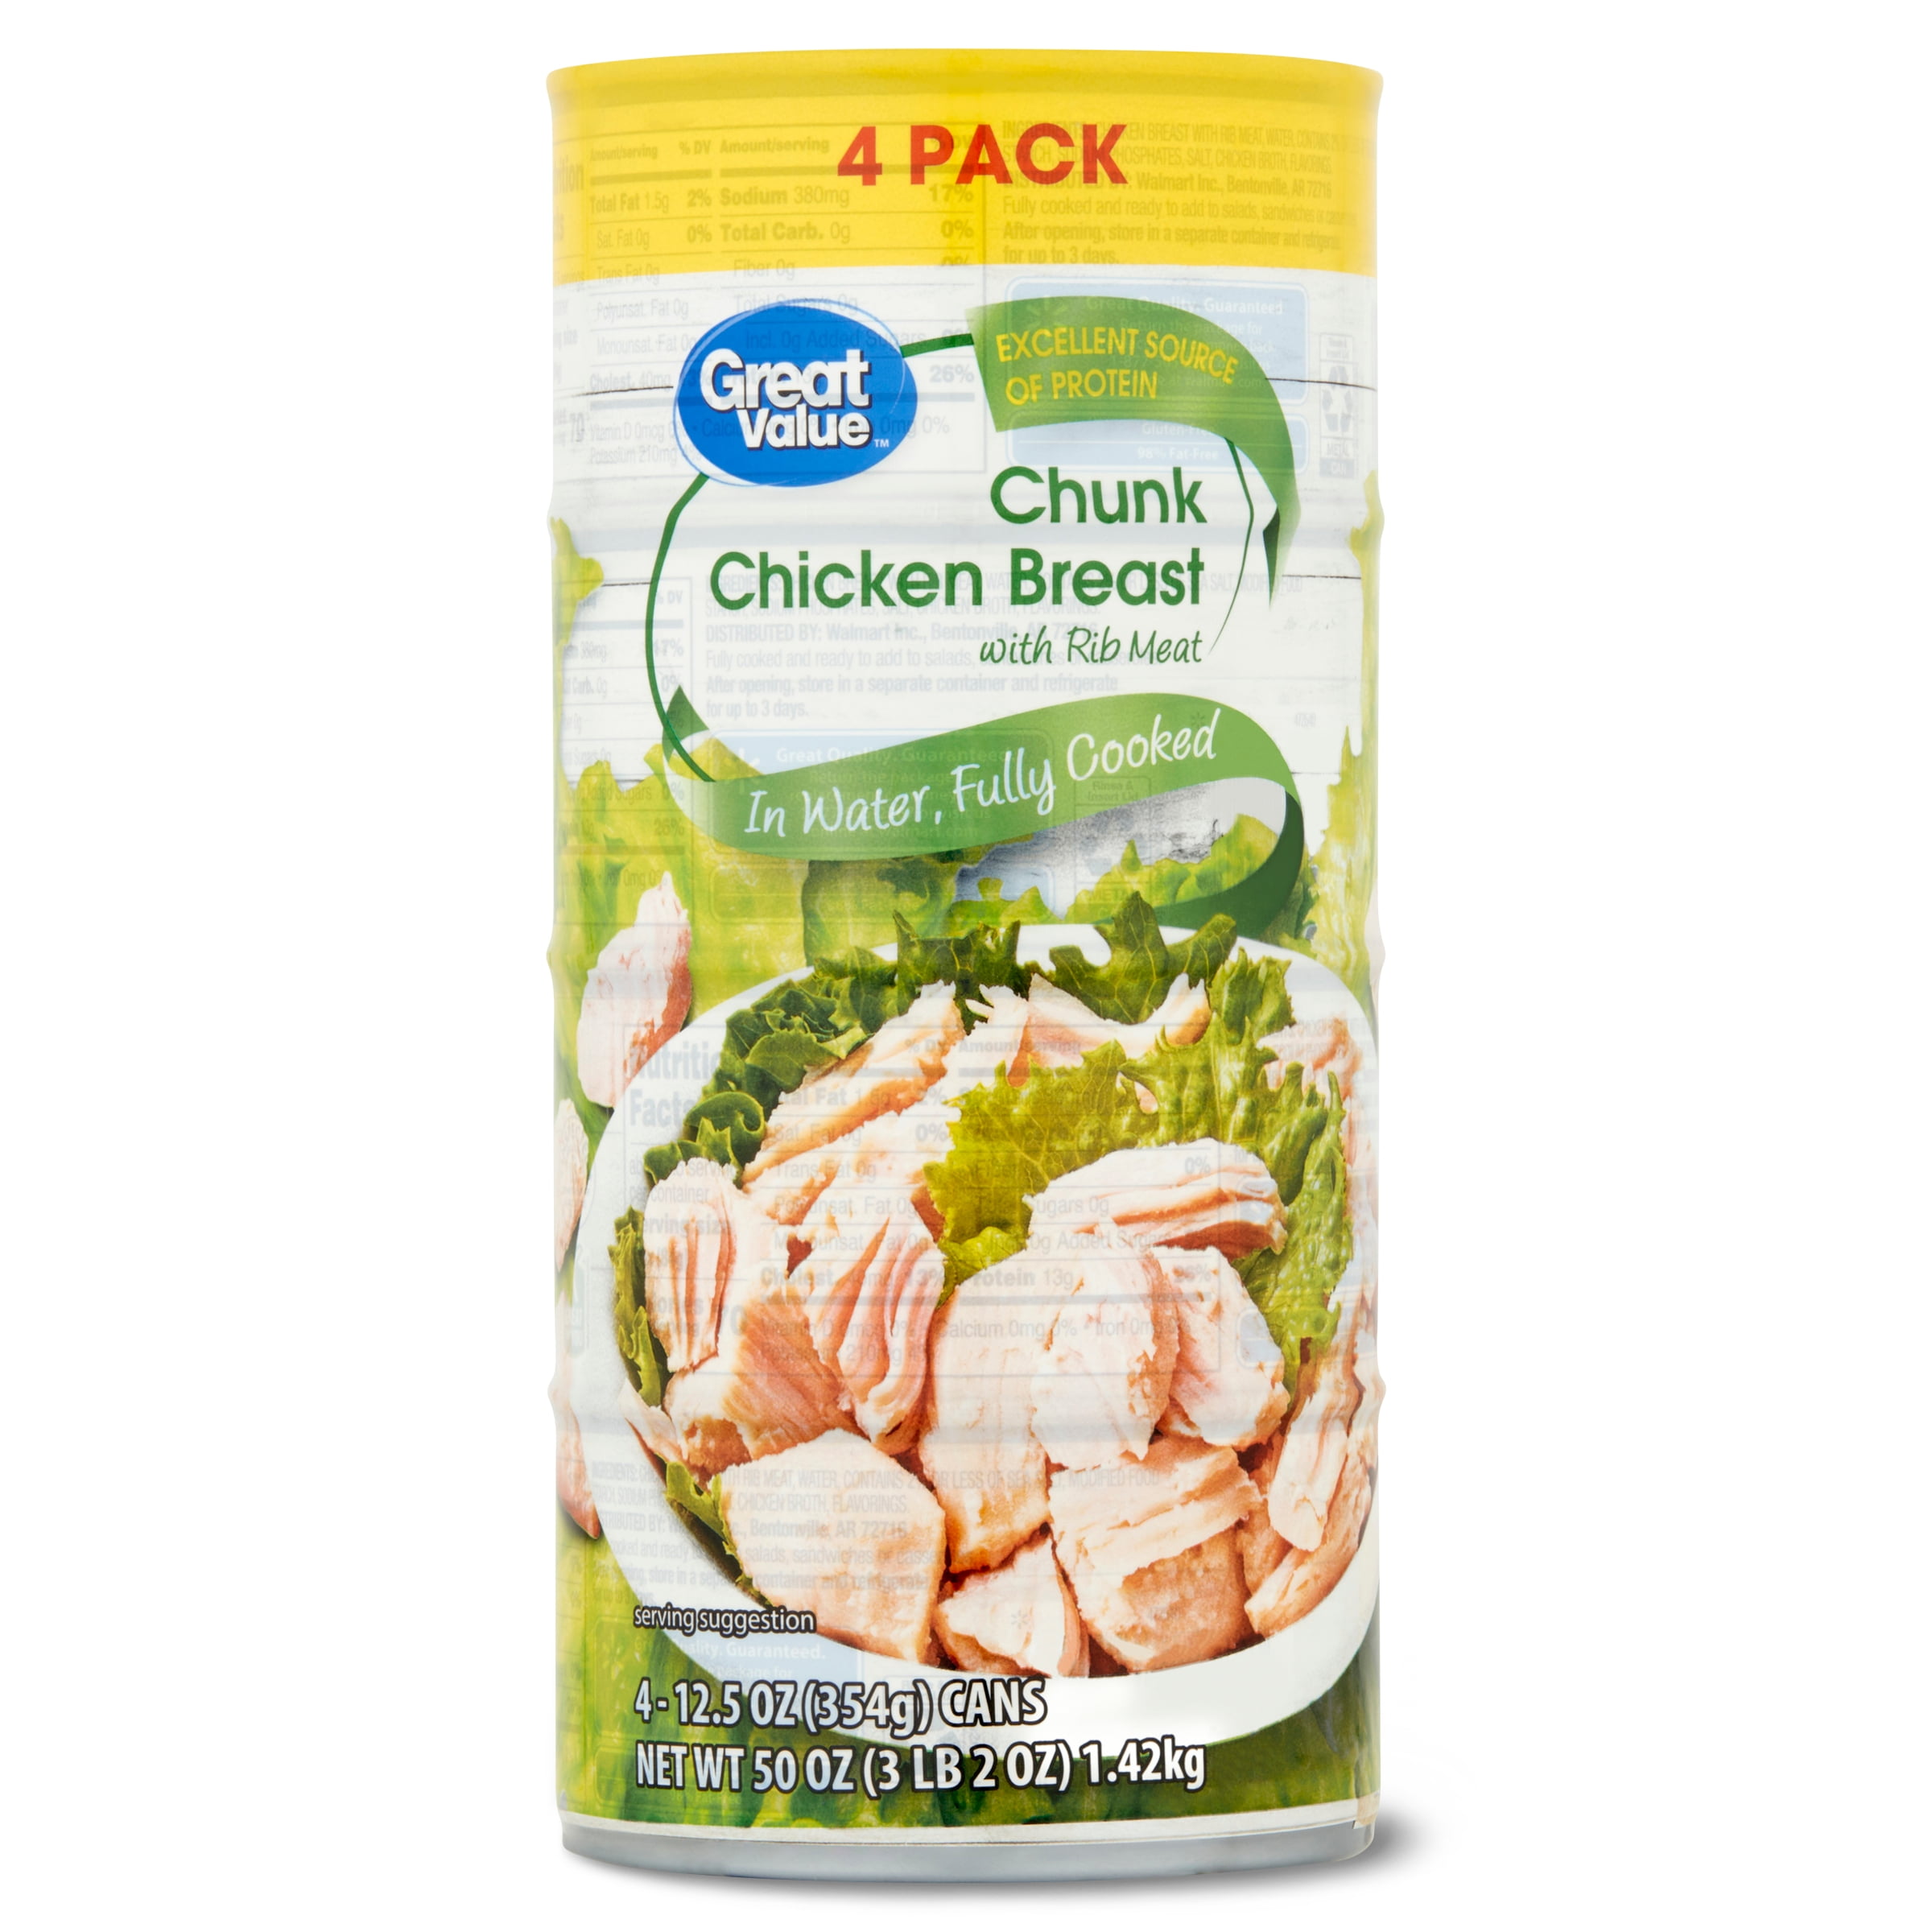 (4 Cans) Great Value Chunk Chicken Breast, 12.5 oz - Walmart